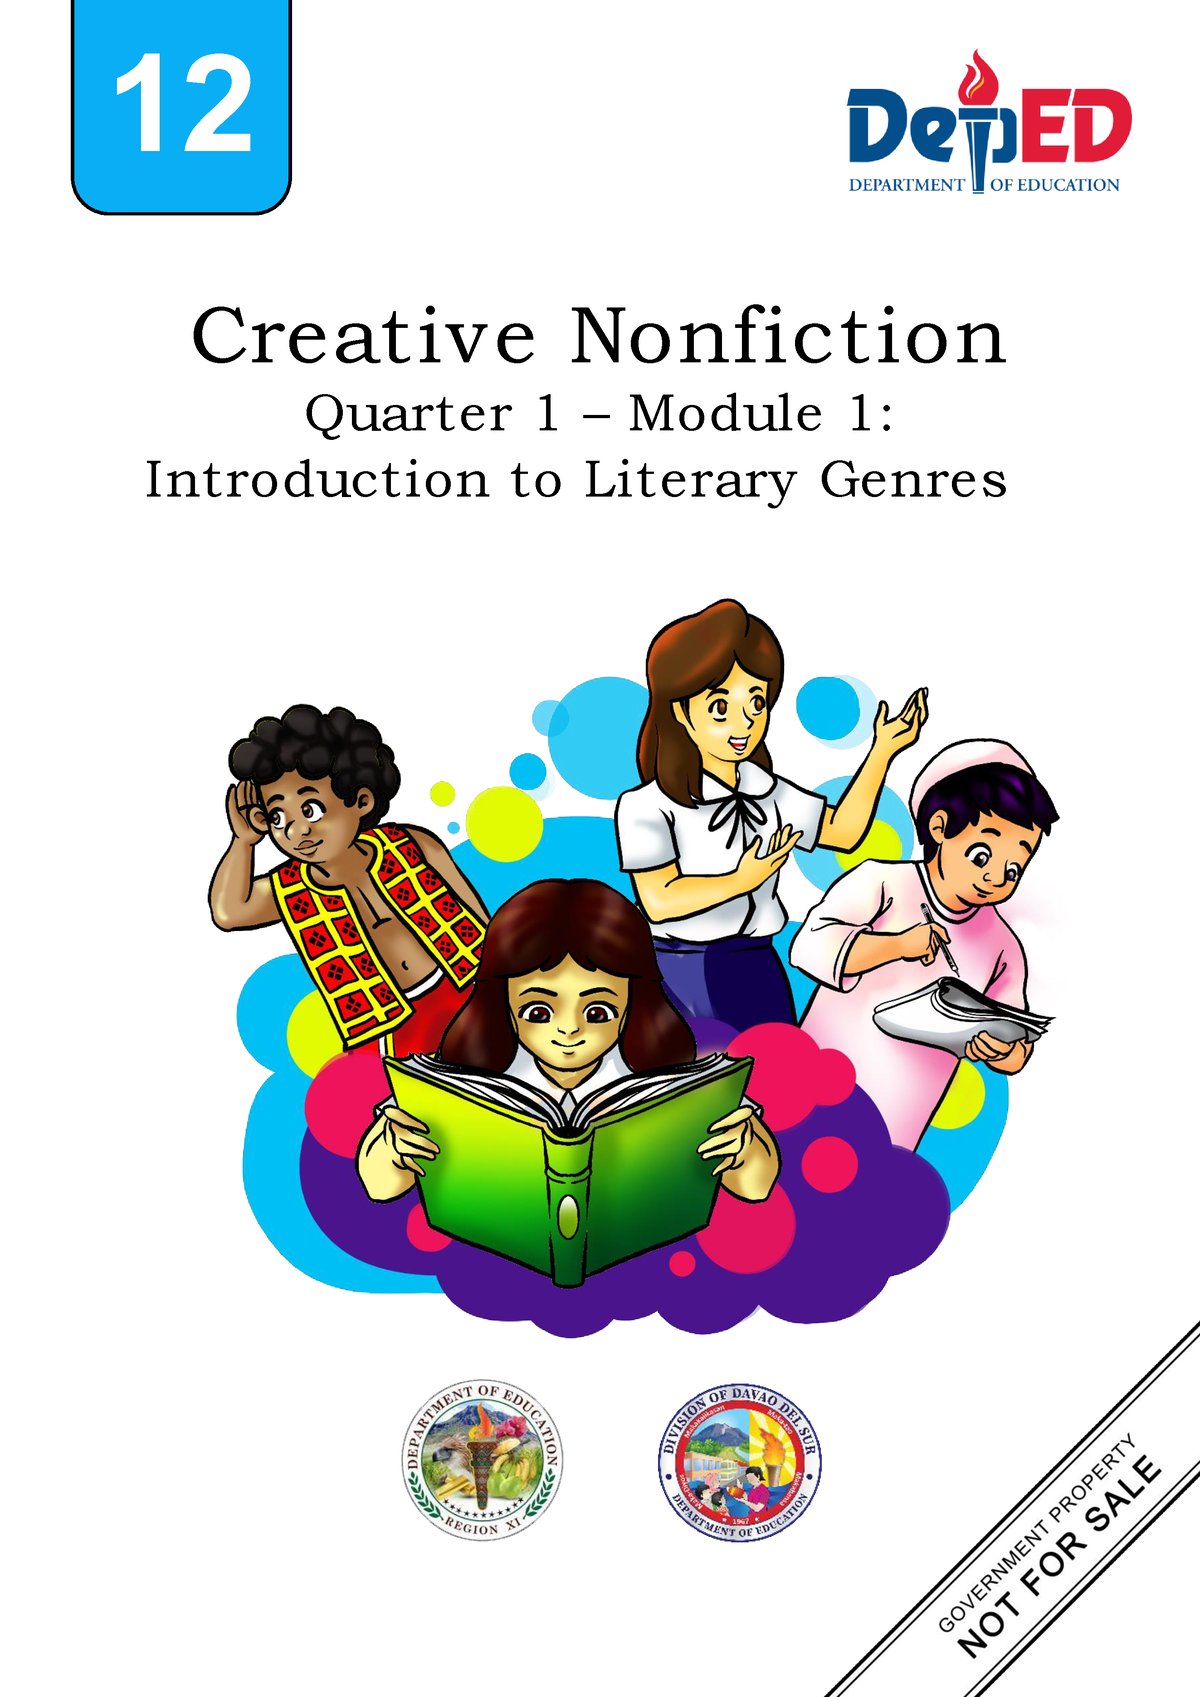 extensive research in creative nonfiction